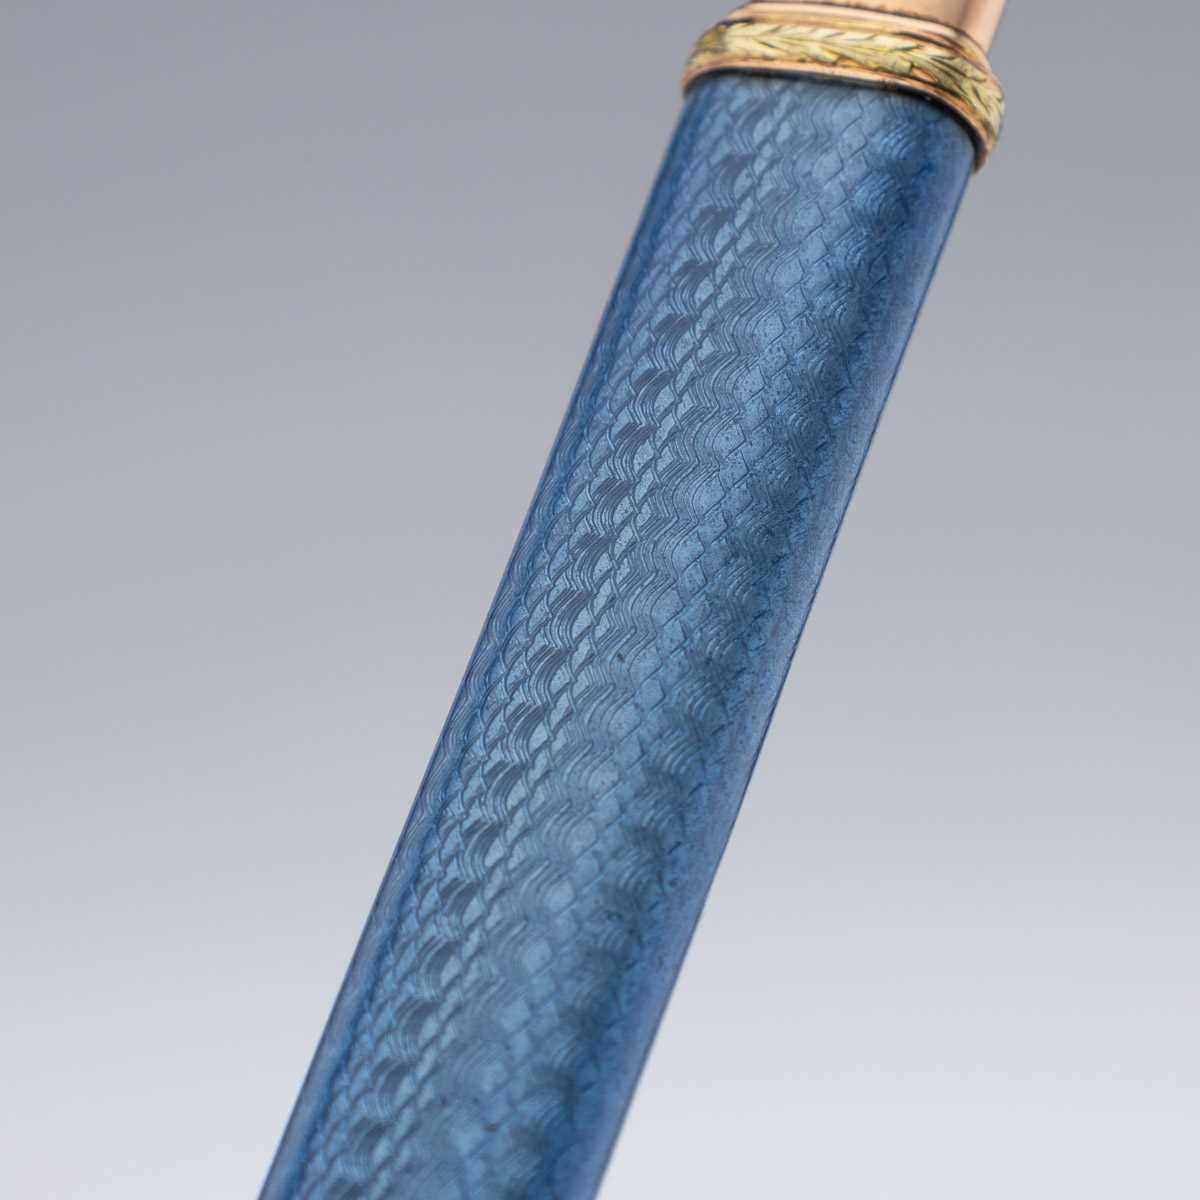 FABERGE: AN EARLY 20TH CENTURY GOLD AND ENAMEL PENCIL, MAKER'S MARK A.A. - Image 5 of 9